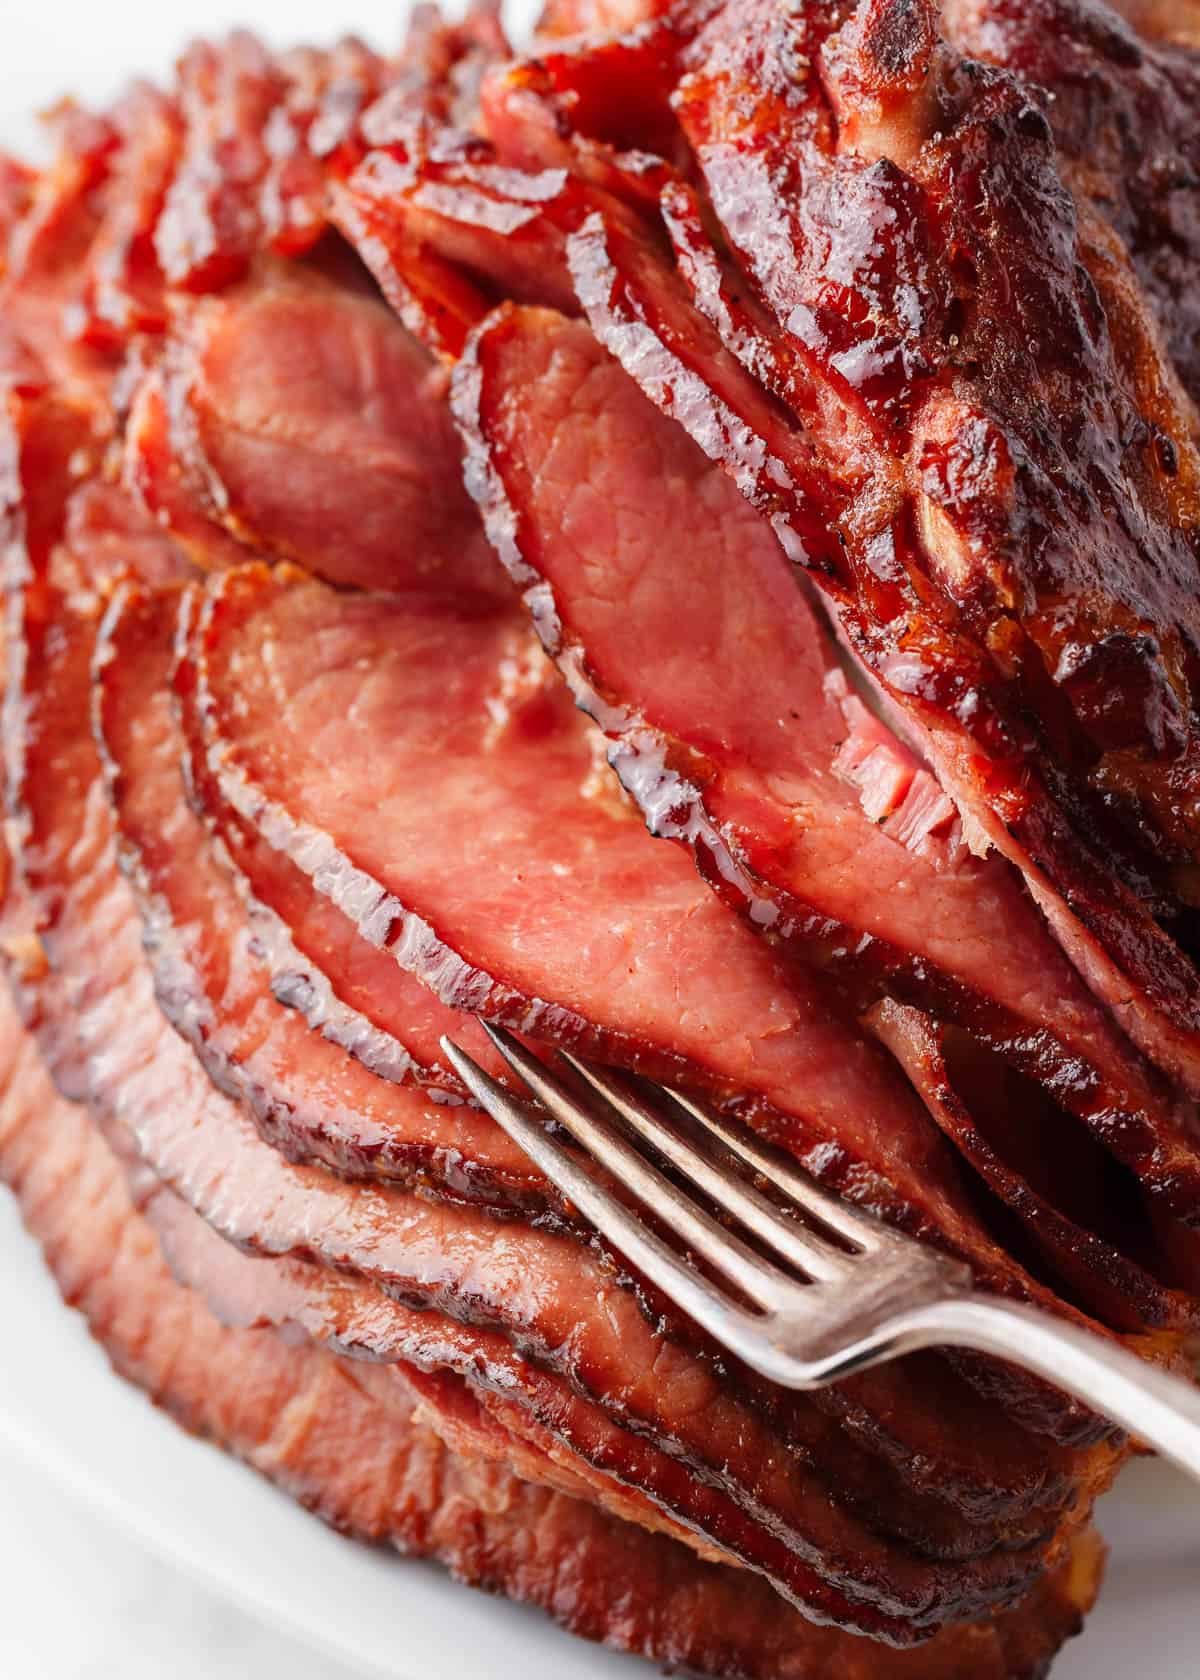 Honey baked ham recipe sliced with a fork between slices.